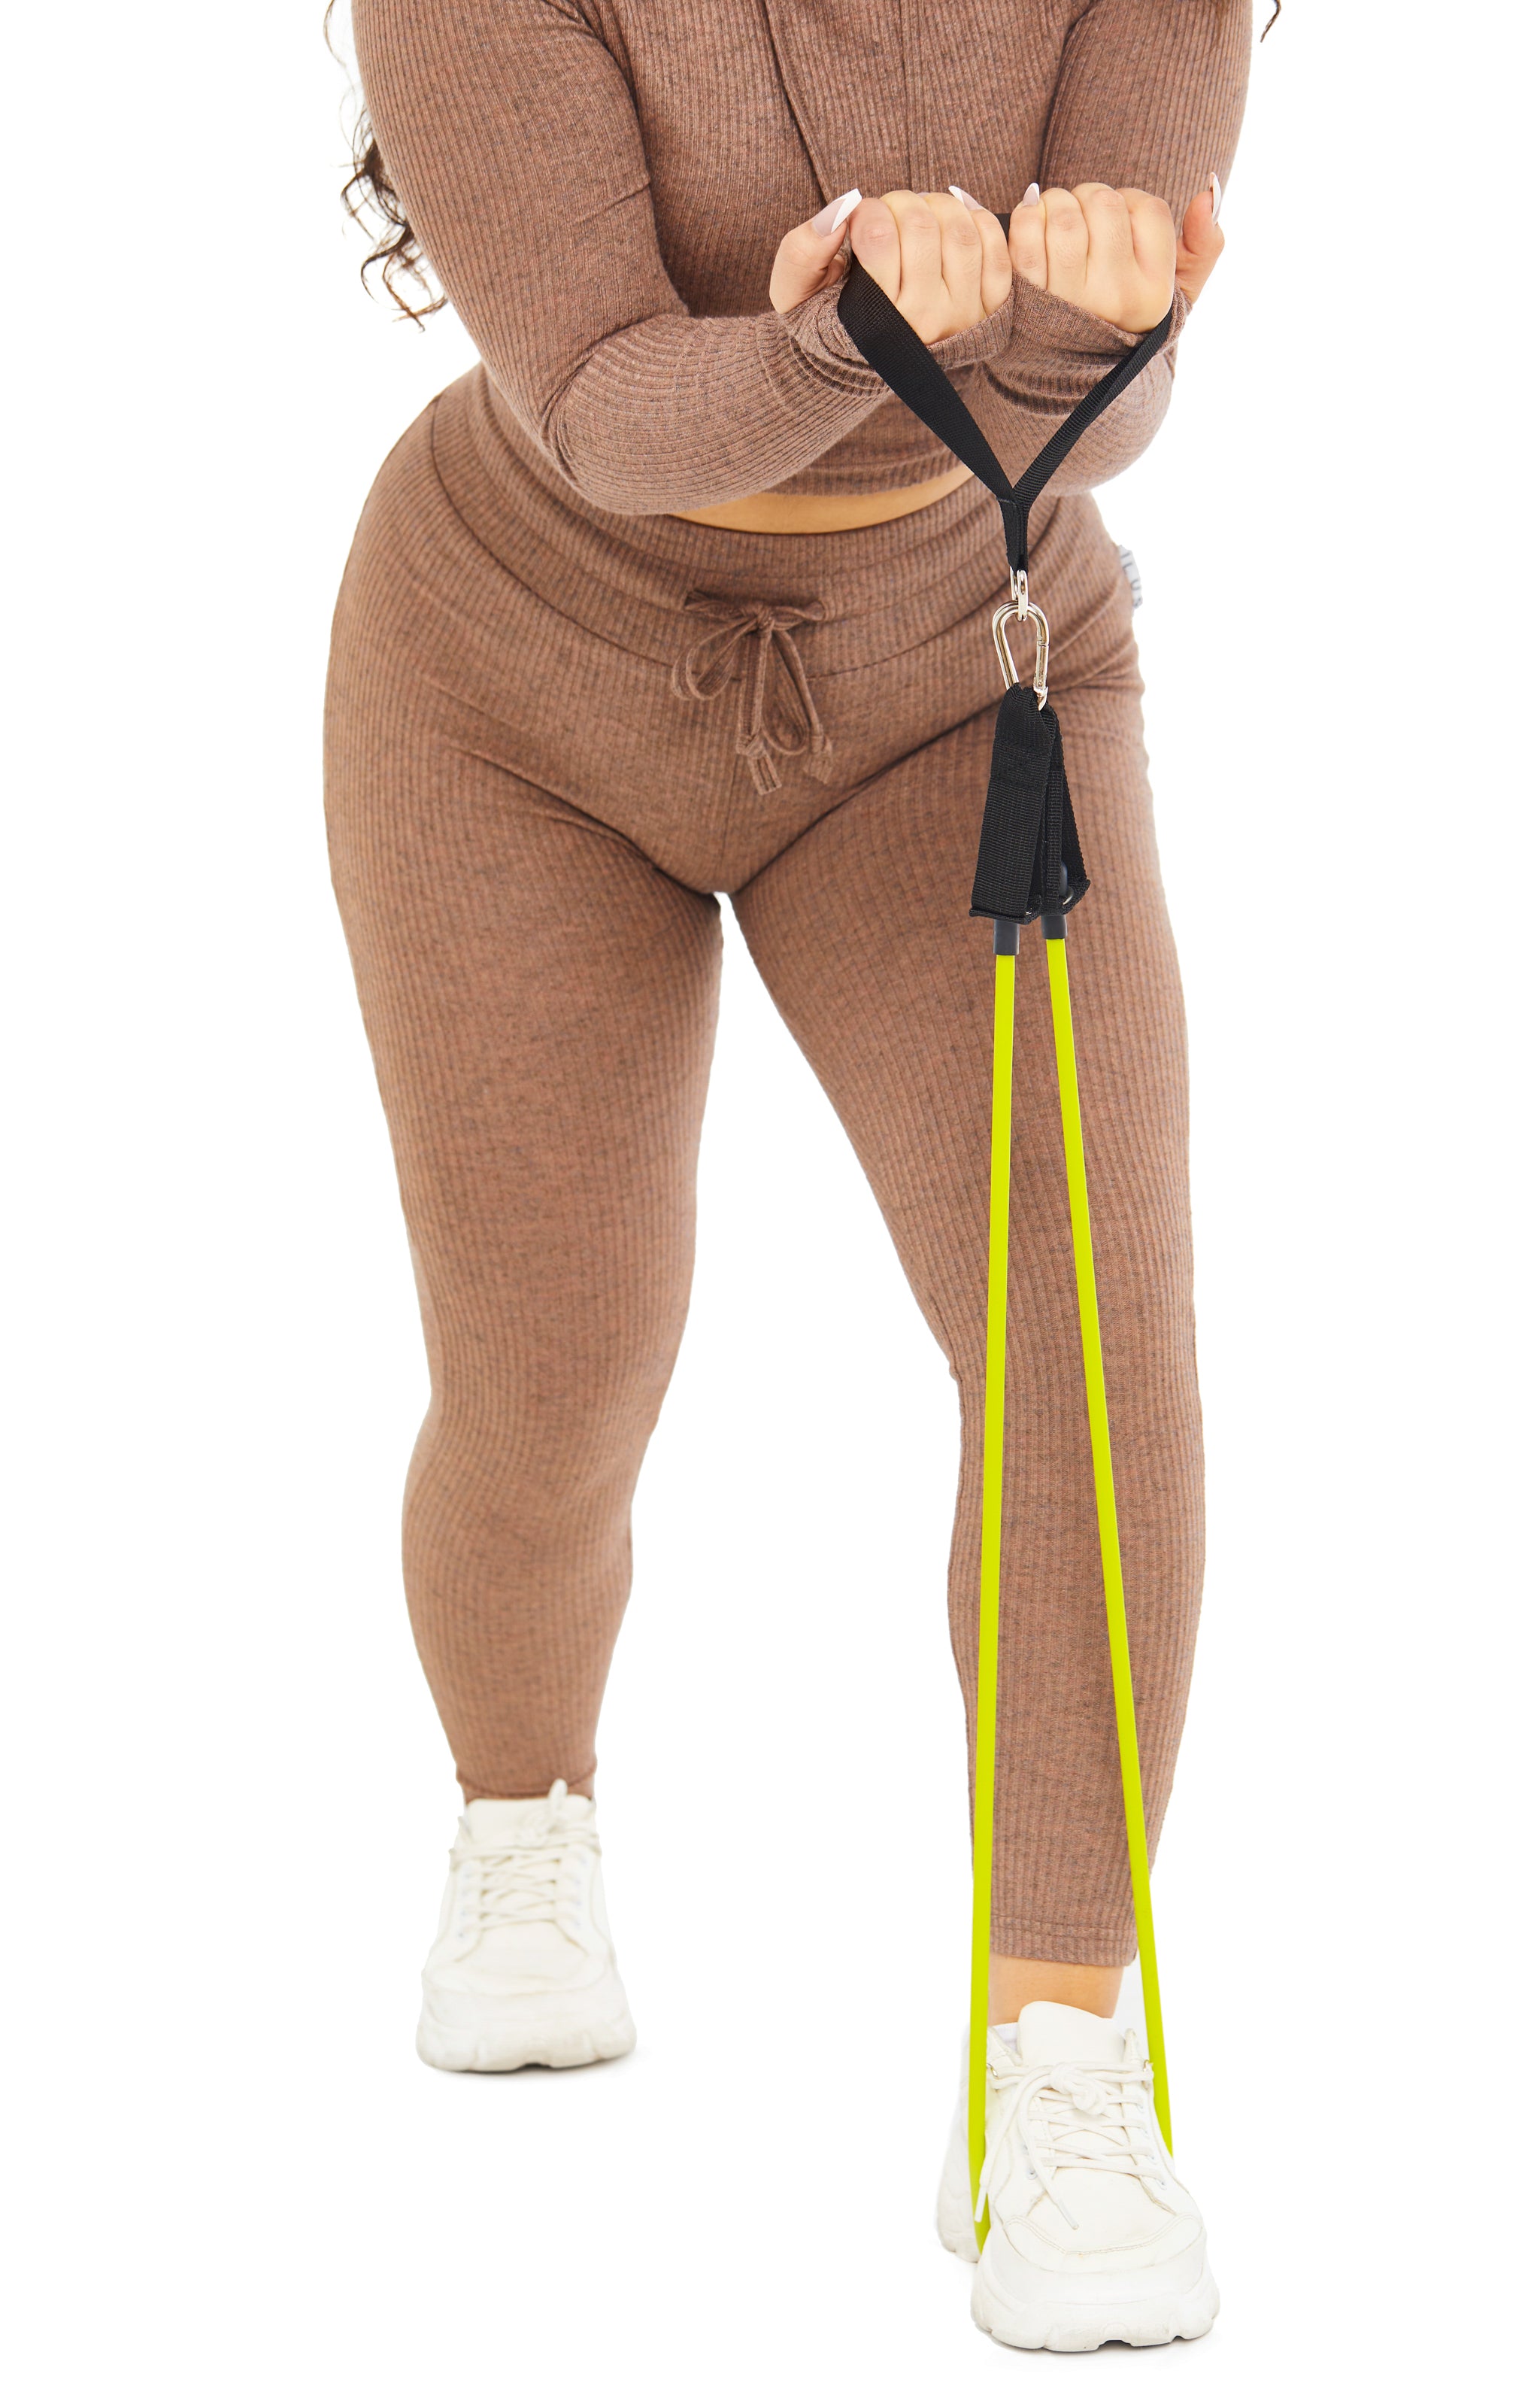 DNF TUBE RESISTANCE BANDS